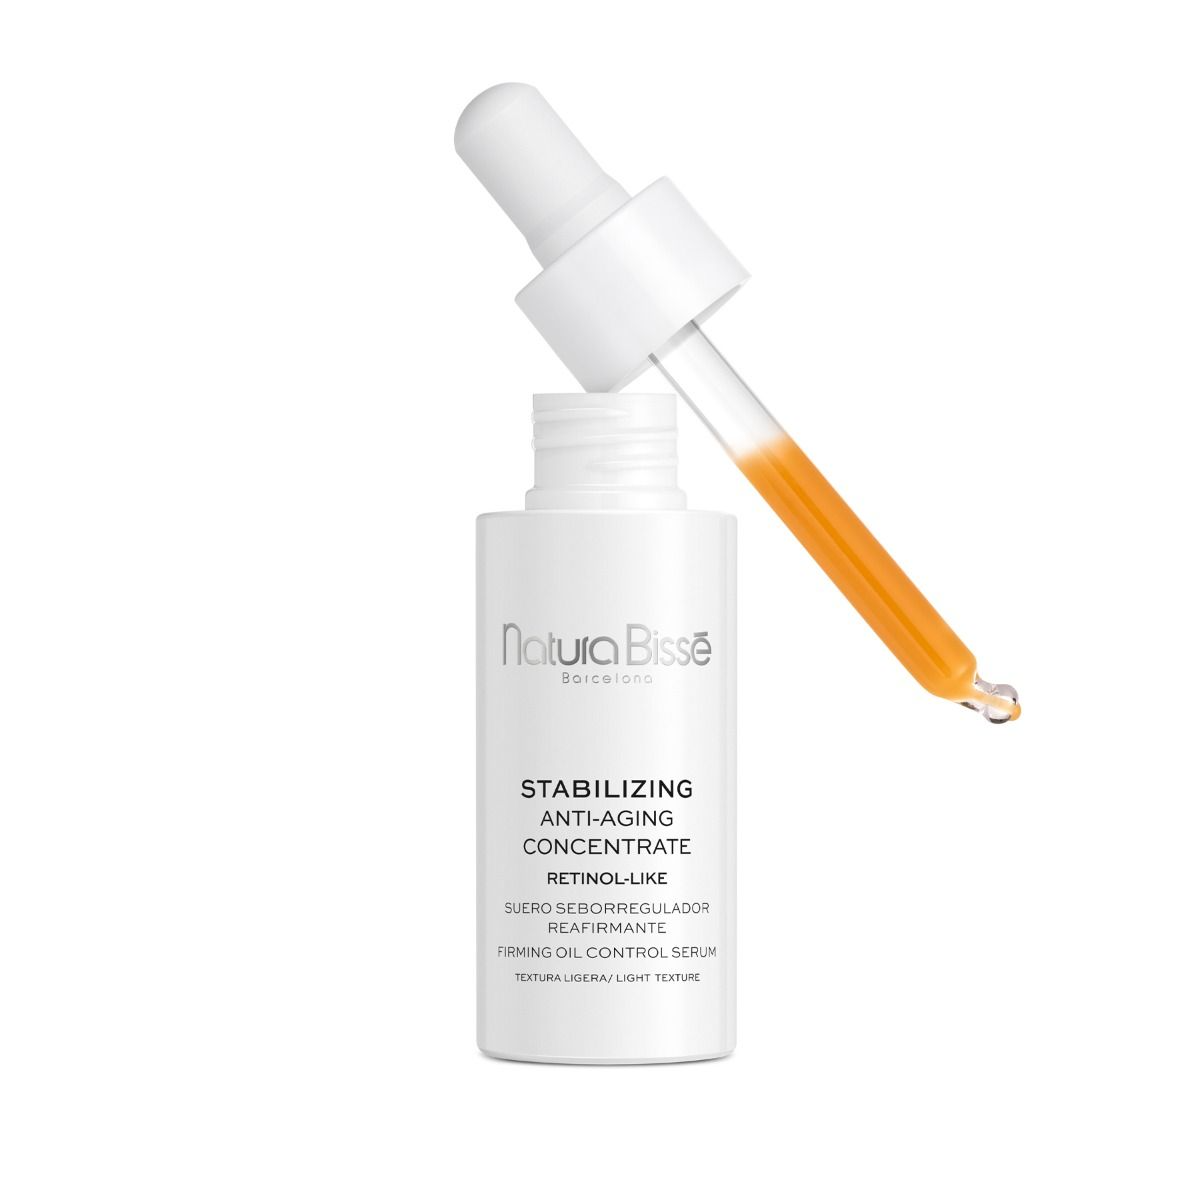 Stabilizing Anti-Aging Concentrate